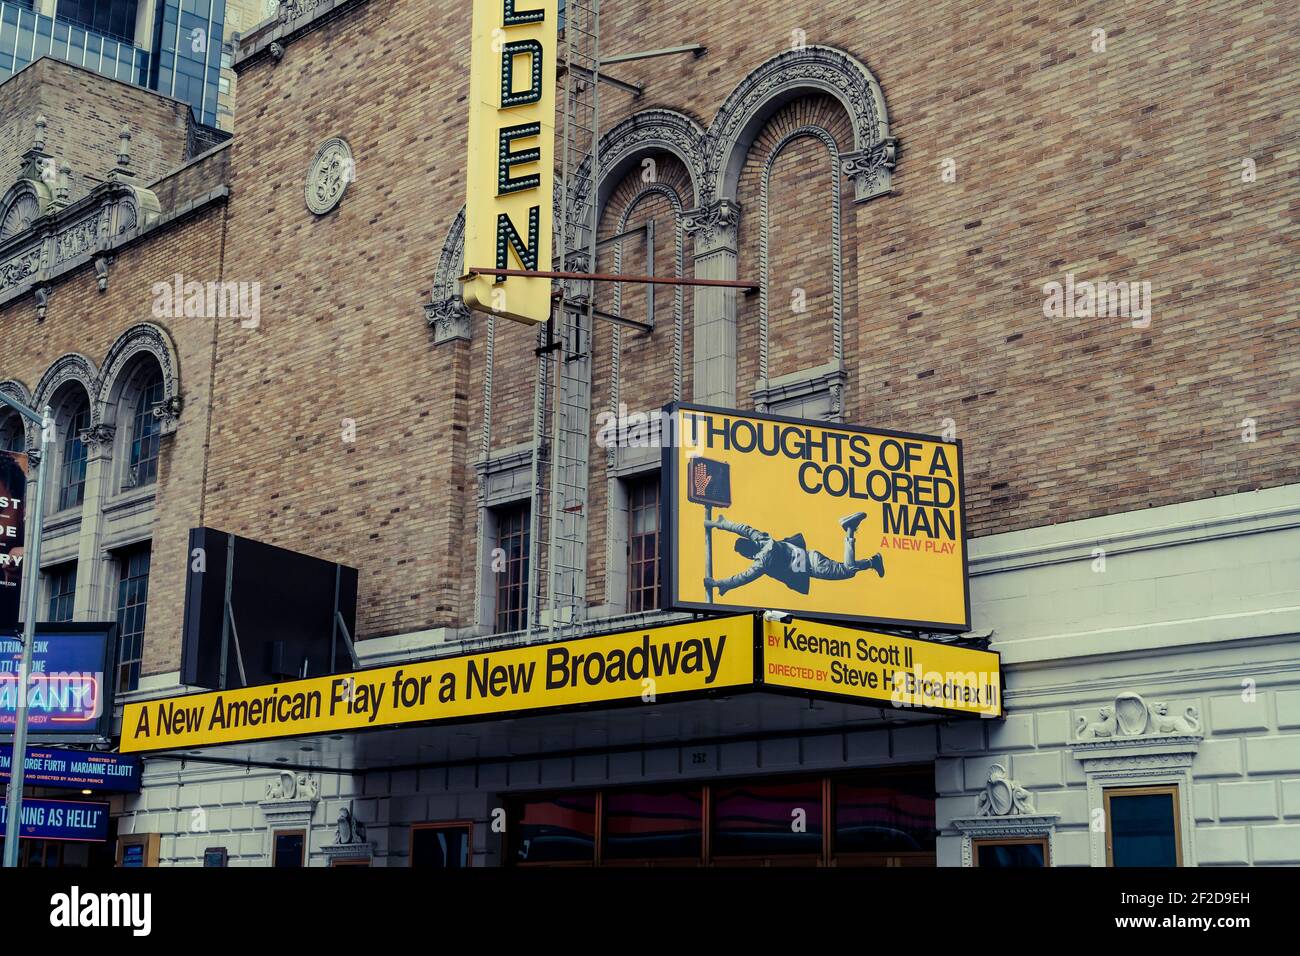 Closed Broadway theaters, including the Golden Theatre, in New York because of the COVID-19 pandemic on Saturday, February 27, 2021. The first new marquee since the pandemic started has been installed on the Golden Theatre for the first new play since the pandemic, 'Thoughts of a Colored Man' by the playwright Keenan Scott II. (© Richard B. Levine) Stock Photo